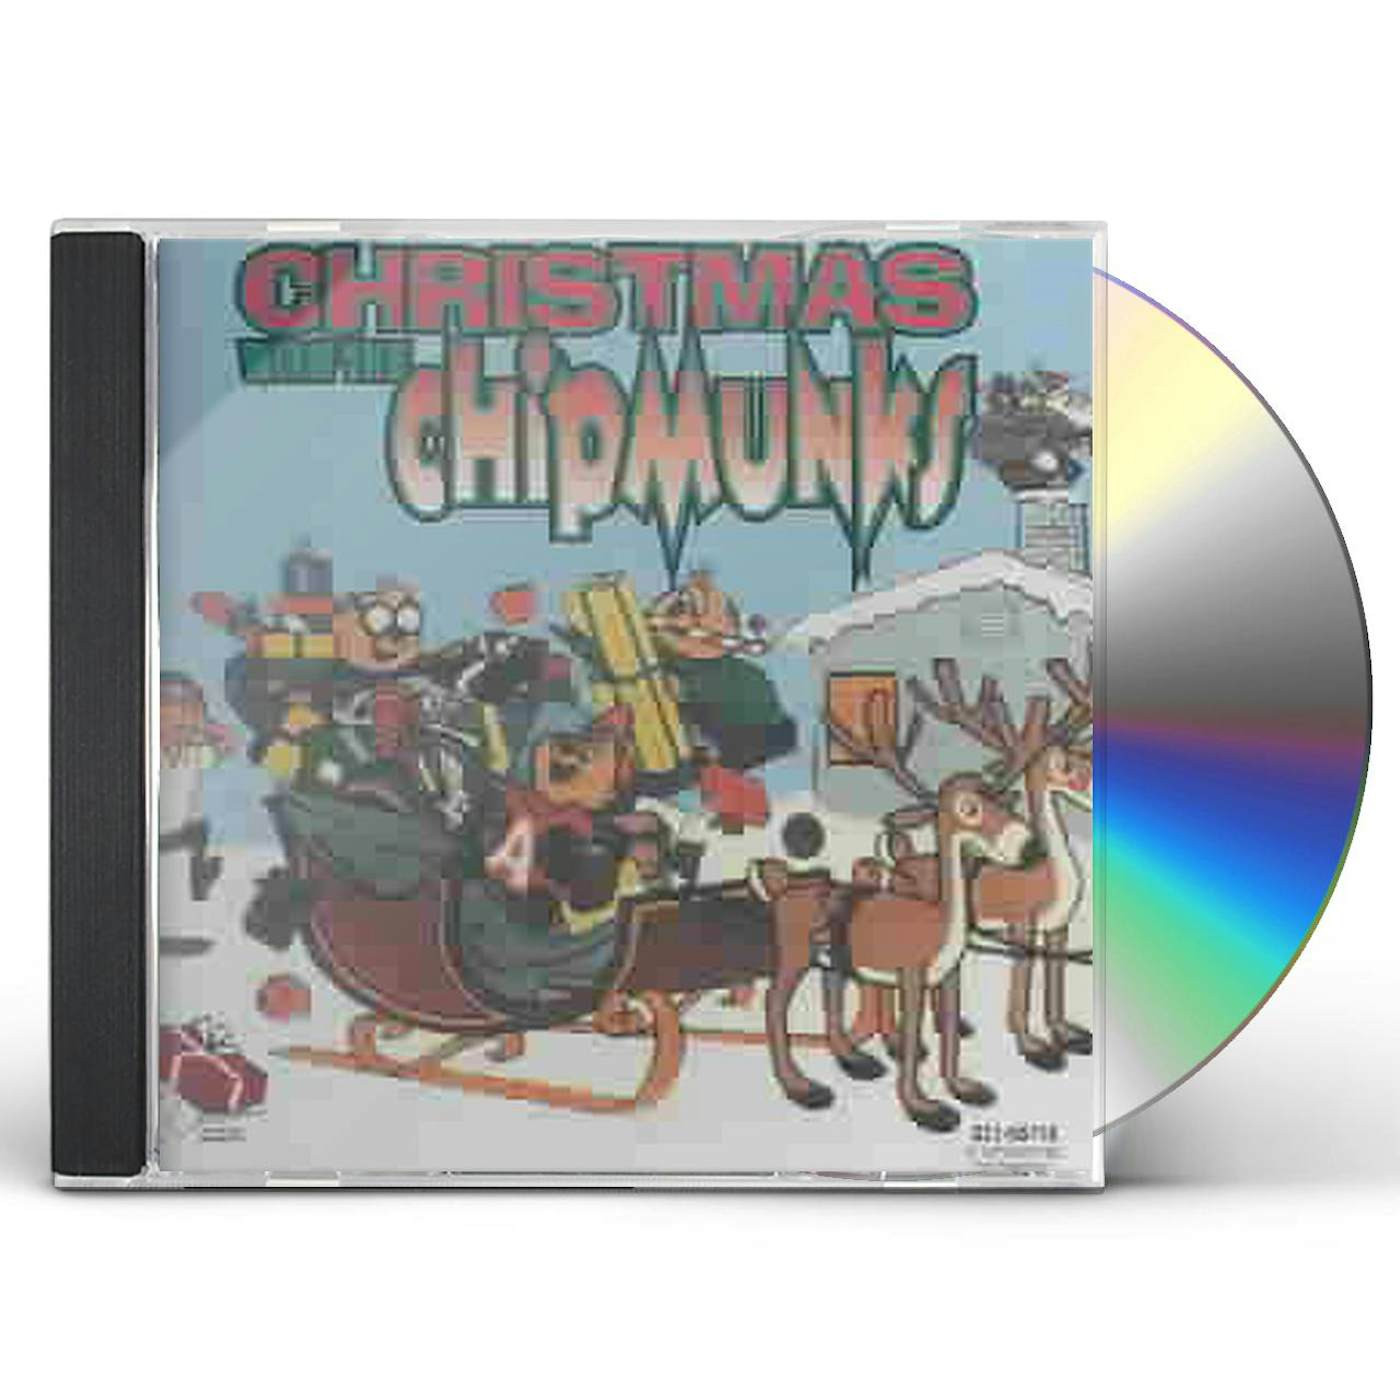 CHRISTMAS WITH Alvin and the Chipmunks 1 CD